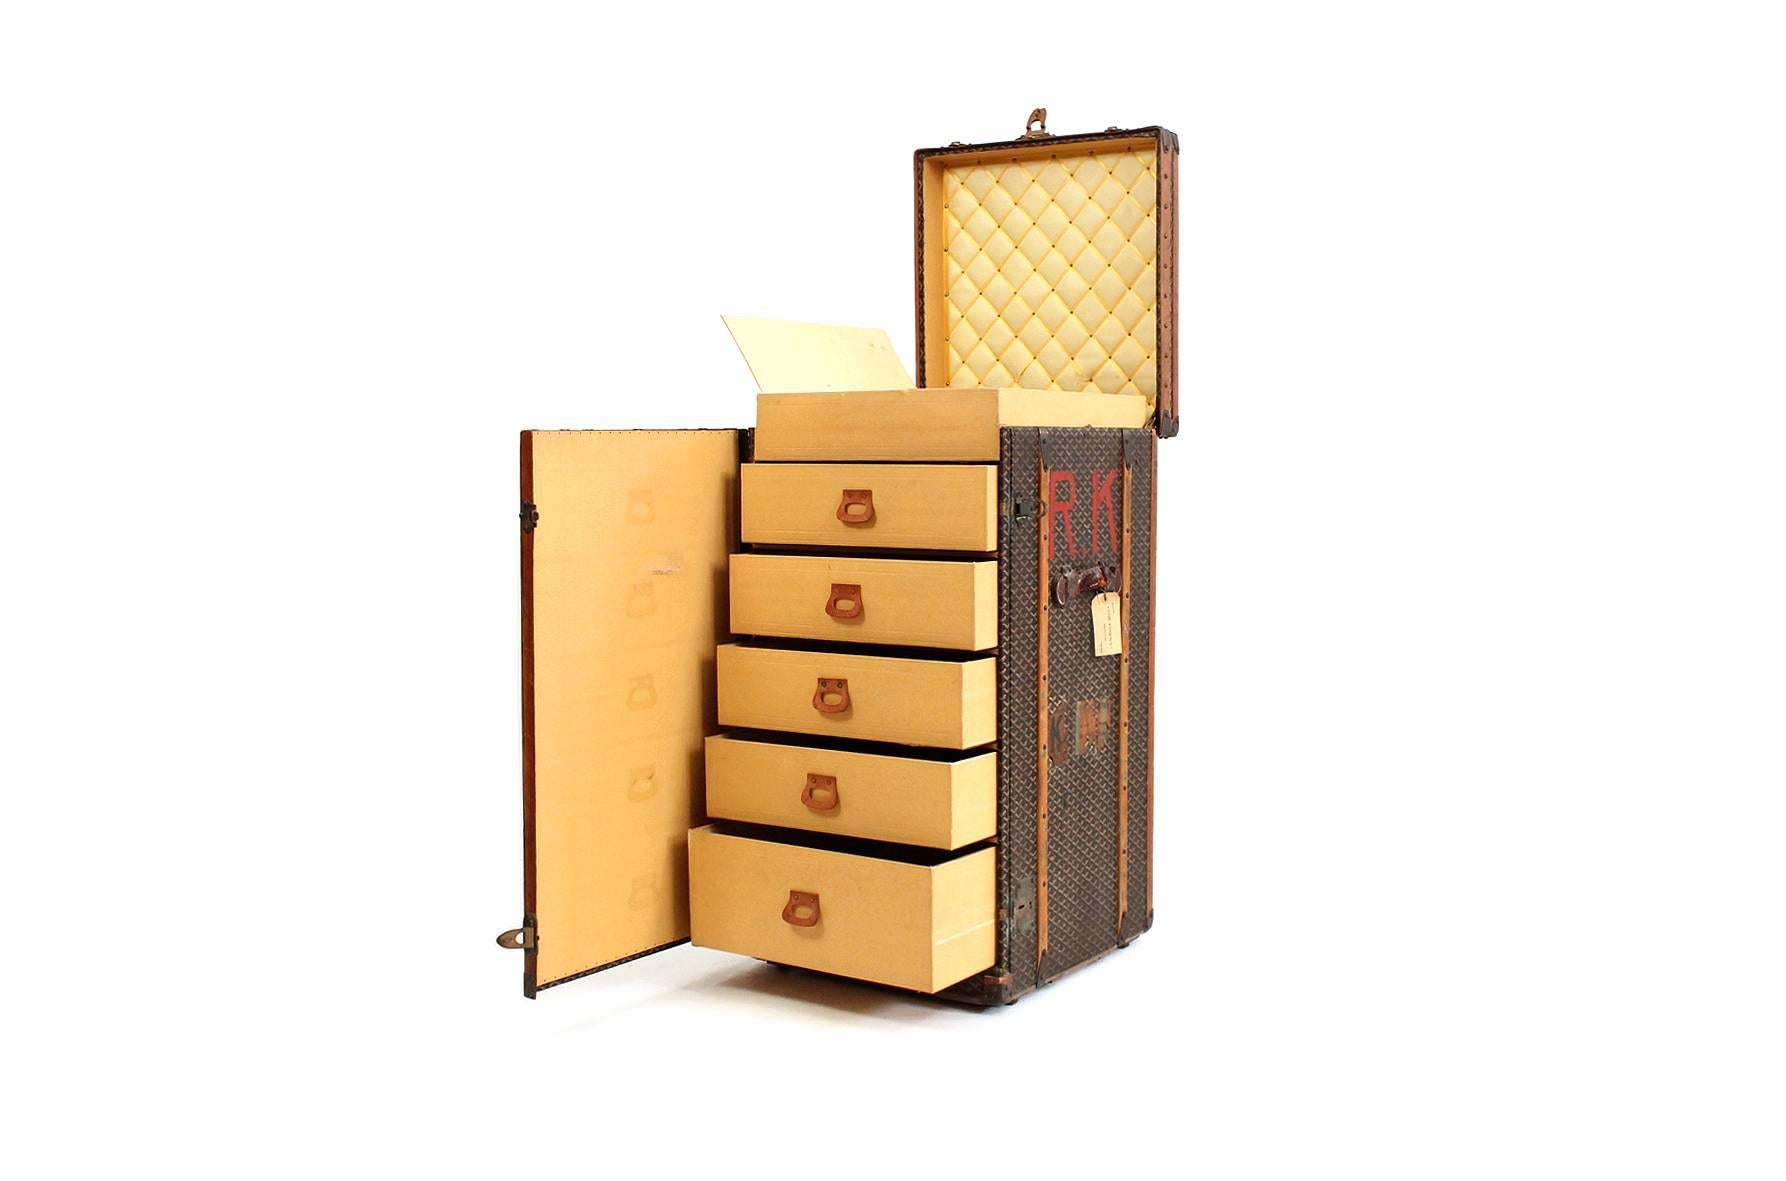 Seldom seen Goyard standing chest trunk covered in Classic chevron canvas, with brass hardware, leather and wood trim. The top of the trunk opens to reveal divided compartments. The front of the trunk opens to reveal 5 drawers with Goyard branded